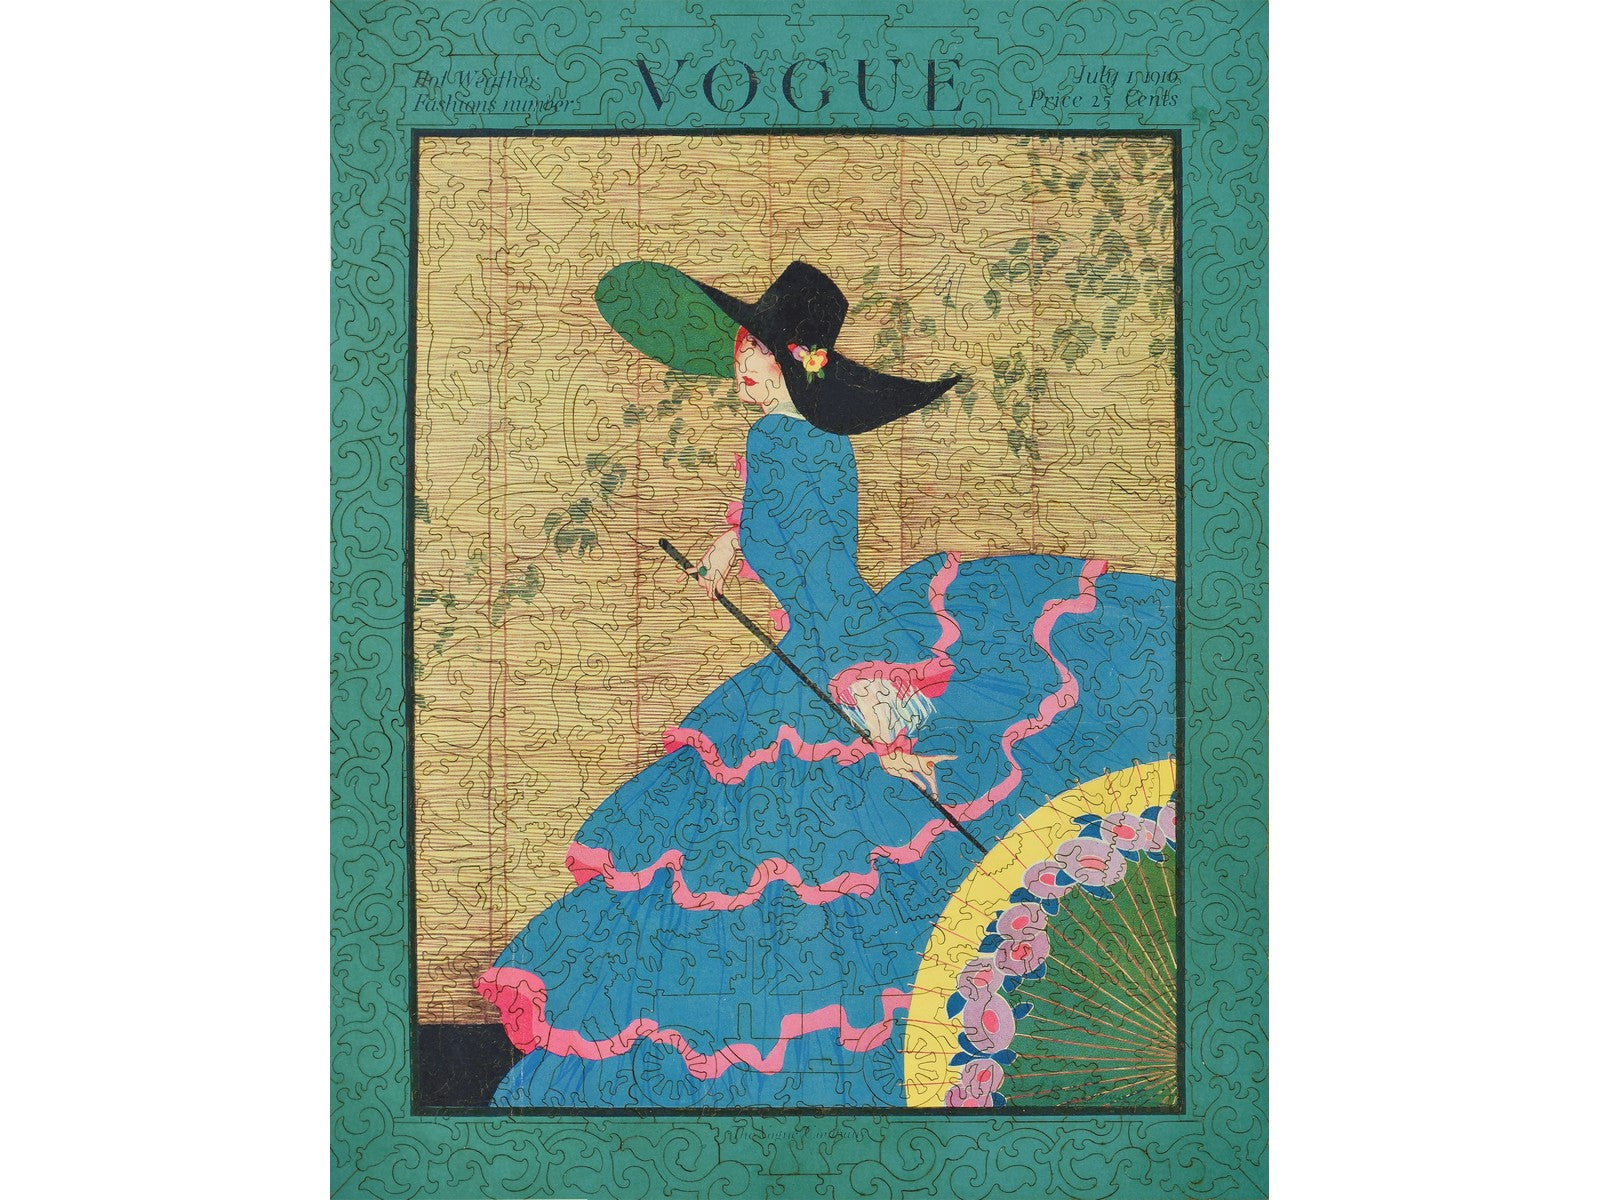 The front of the puzzle, Vogue: Hot Weather Fashions Number.